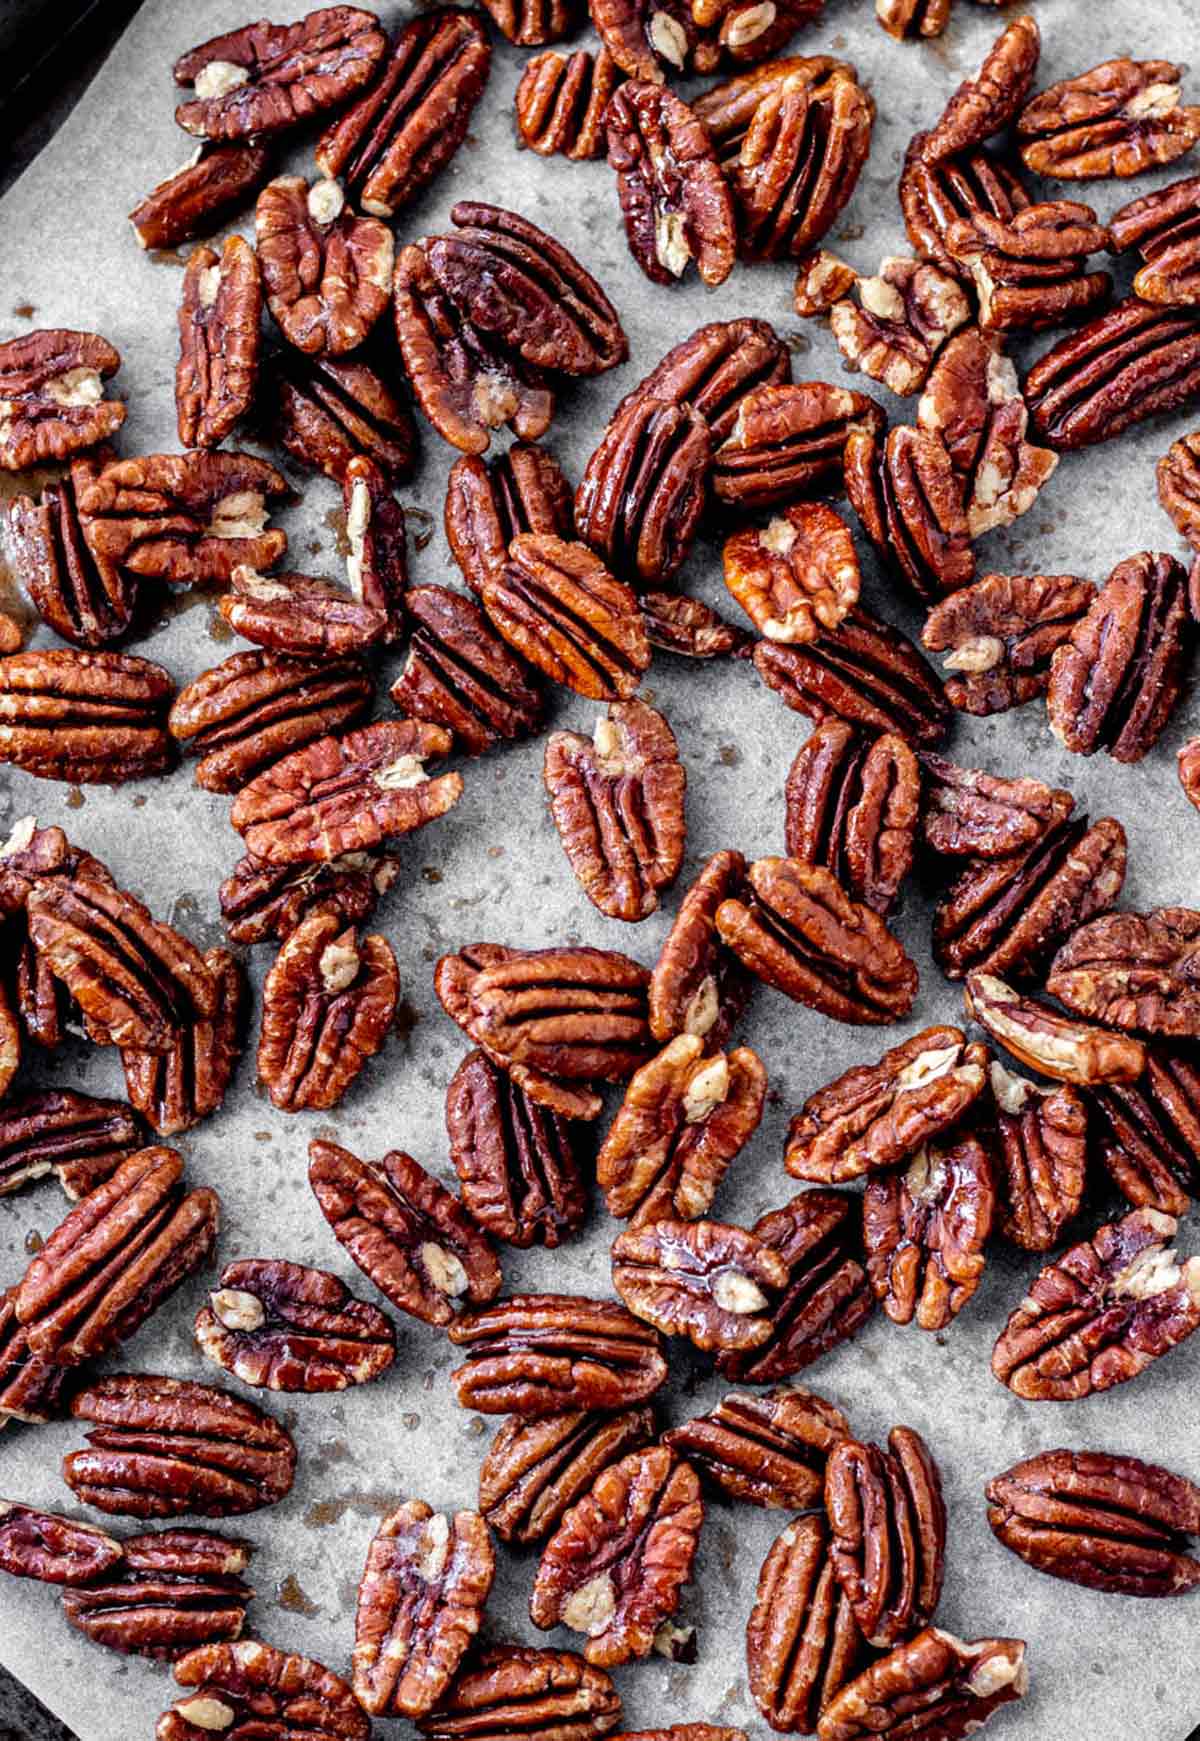 A parchment lined baking sheet of maple syrup roasted pecan halves.